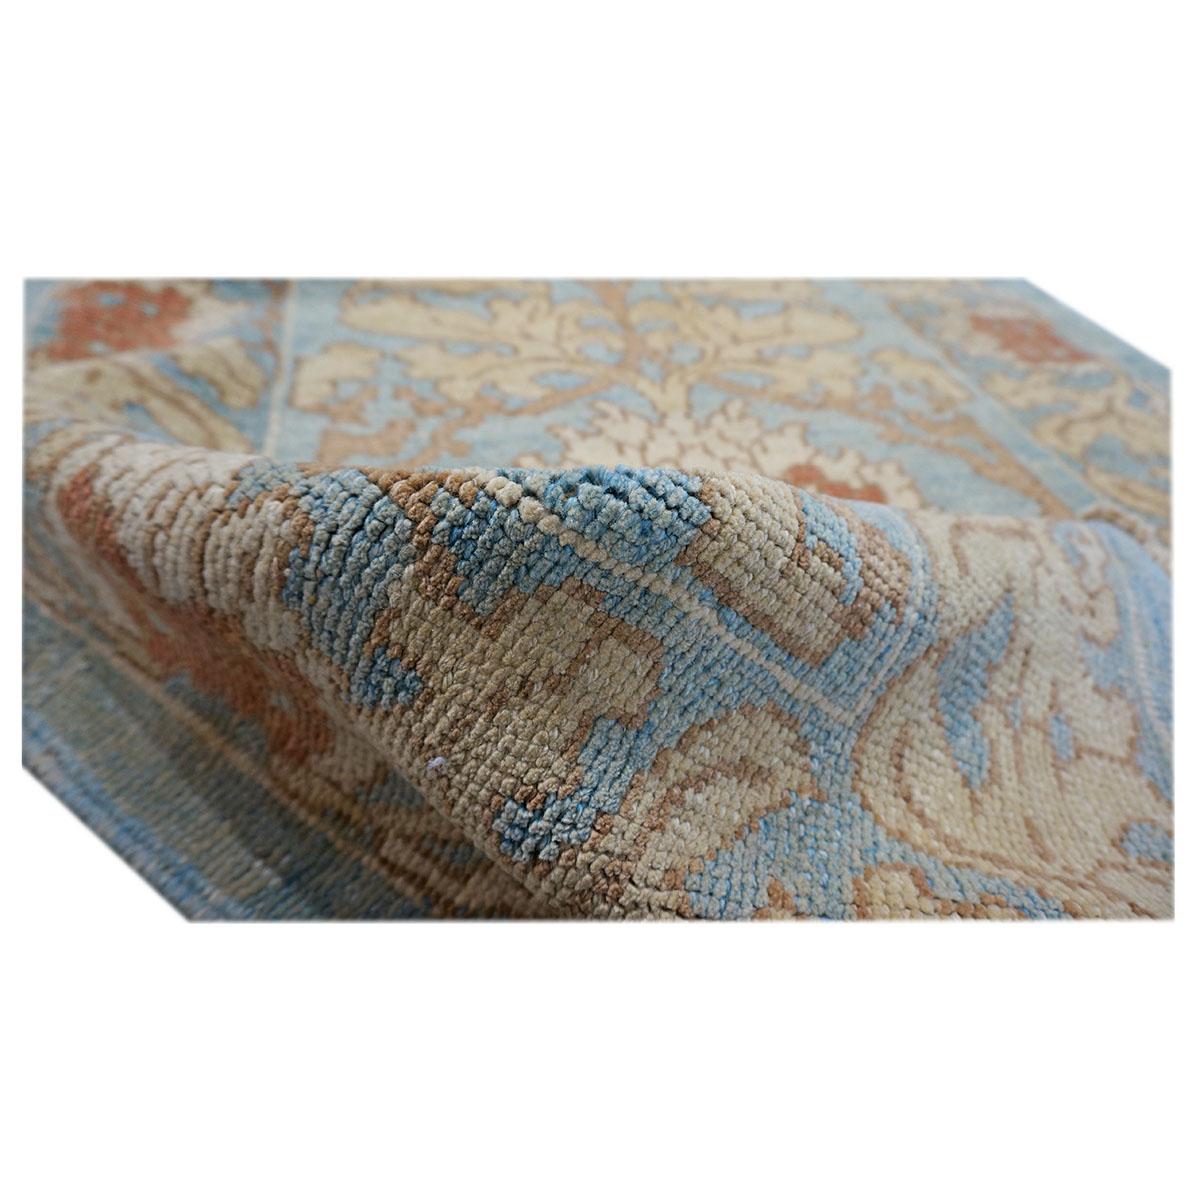 21st Century William Morris Donegal Carpet 4.4x5.7 Light Blue, Tan, & Rust In Good Condition For Sale In Houston, TX